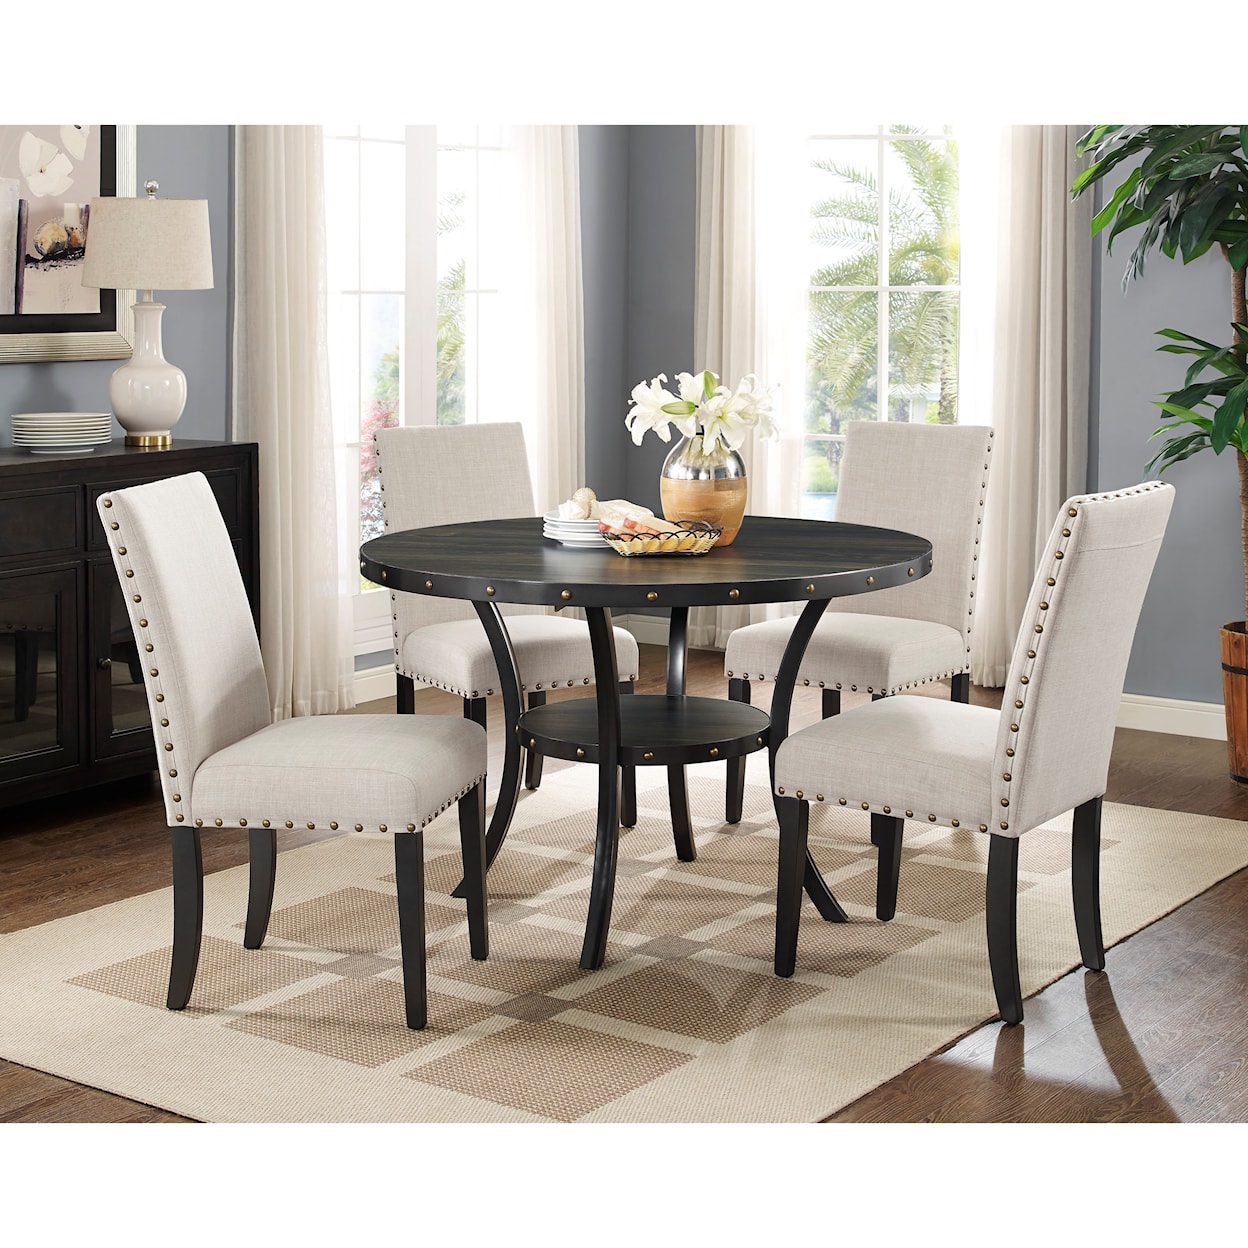 New Classic Crispin 5-Piece Table and Chair Set